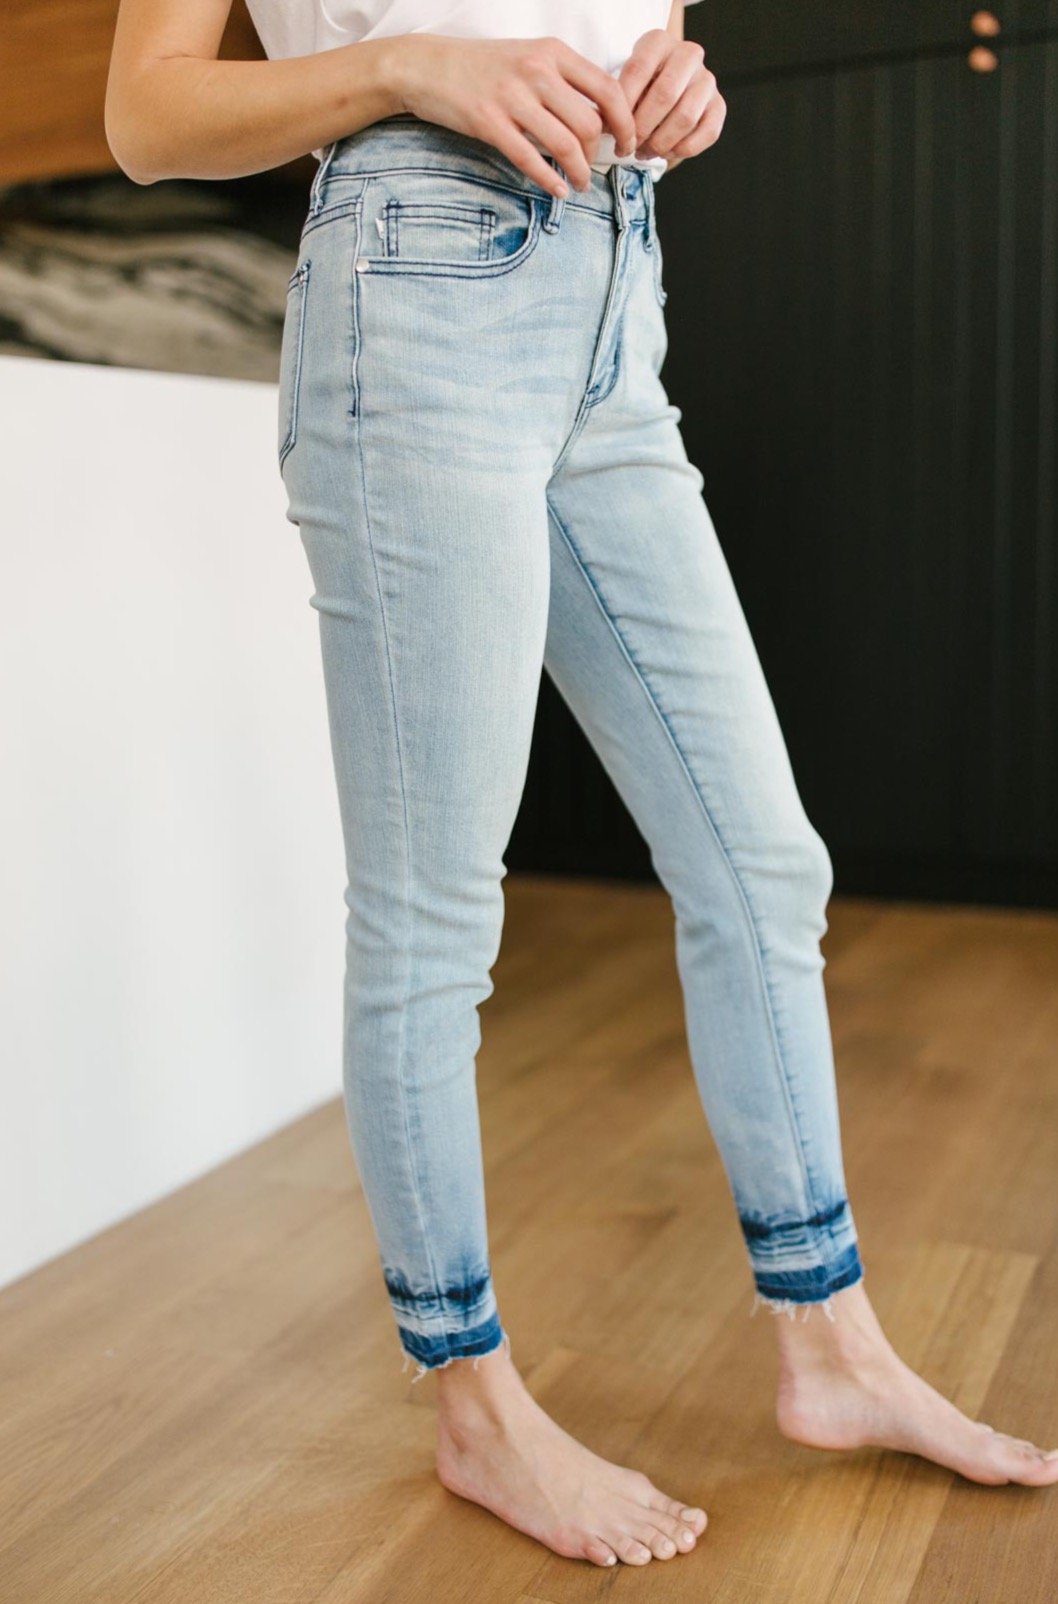 Melted Blues Light Wash Jeans